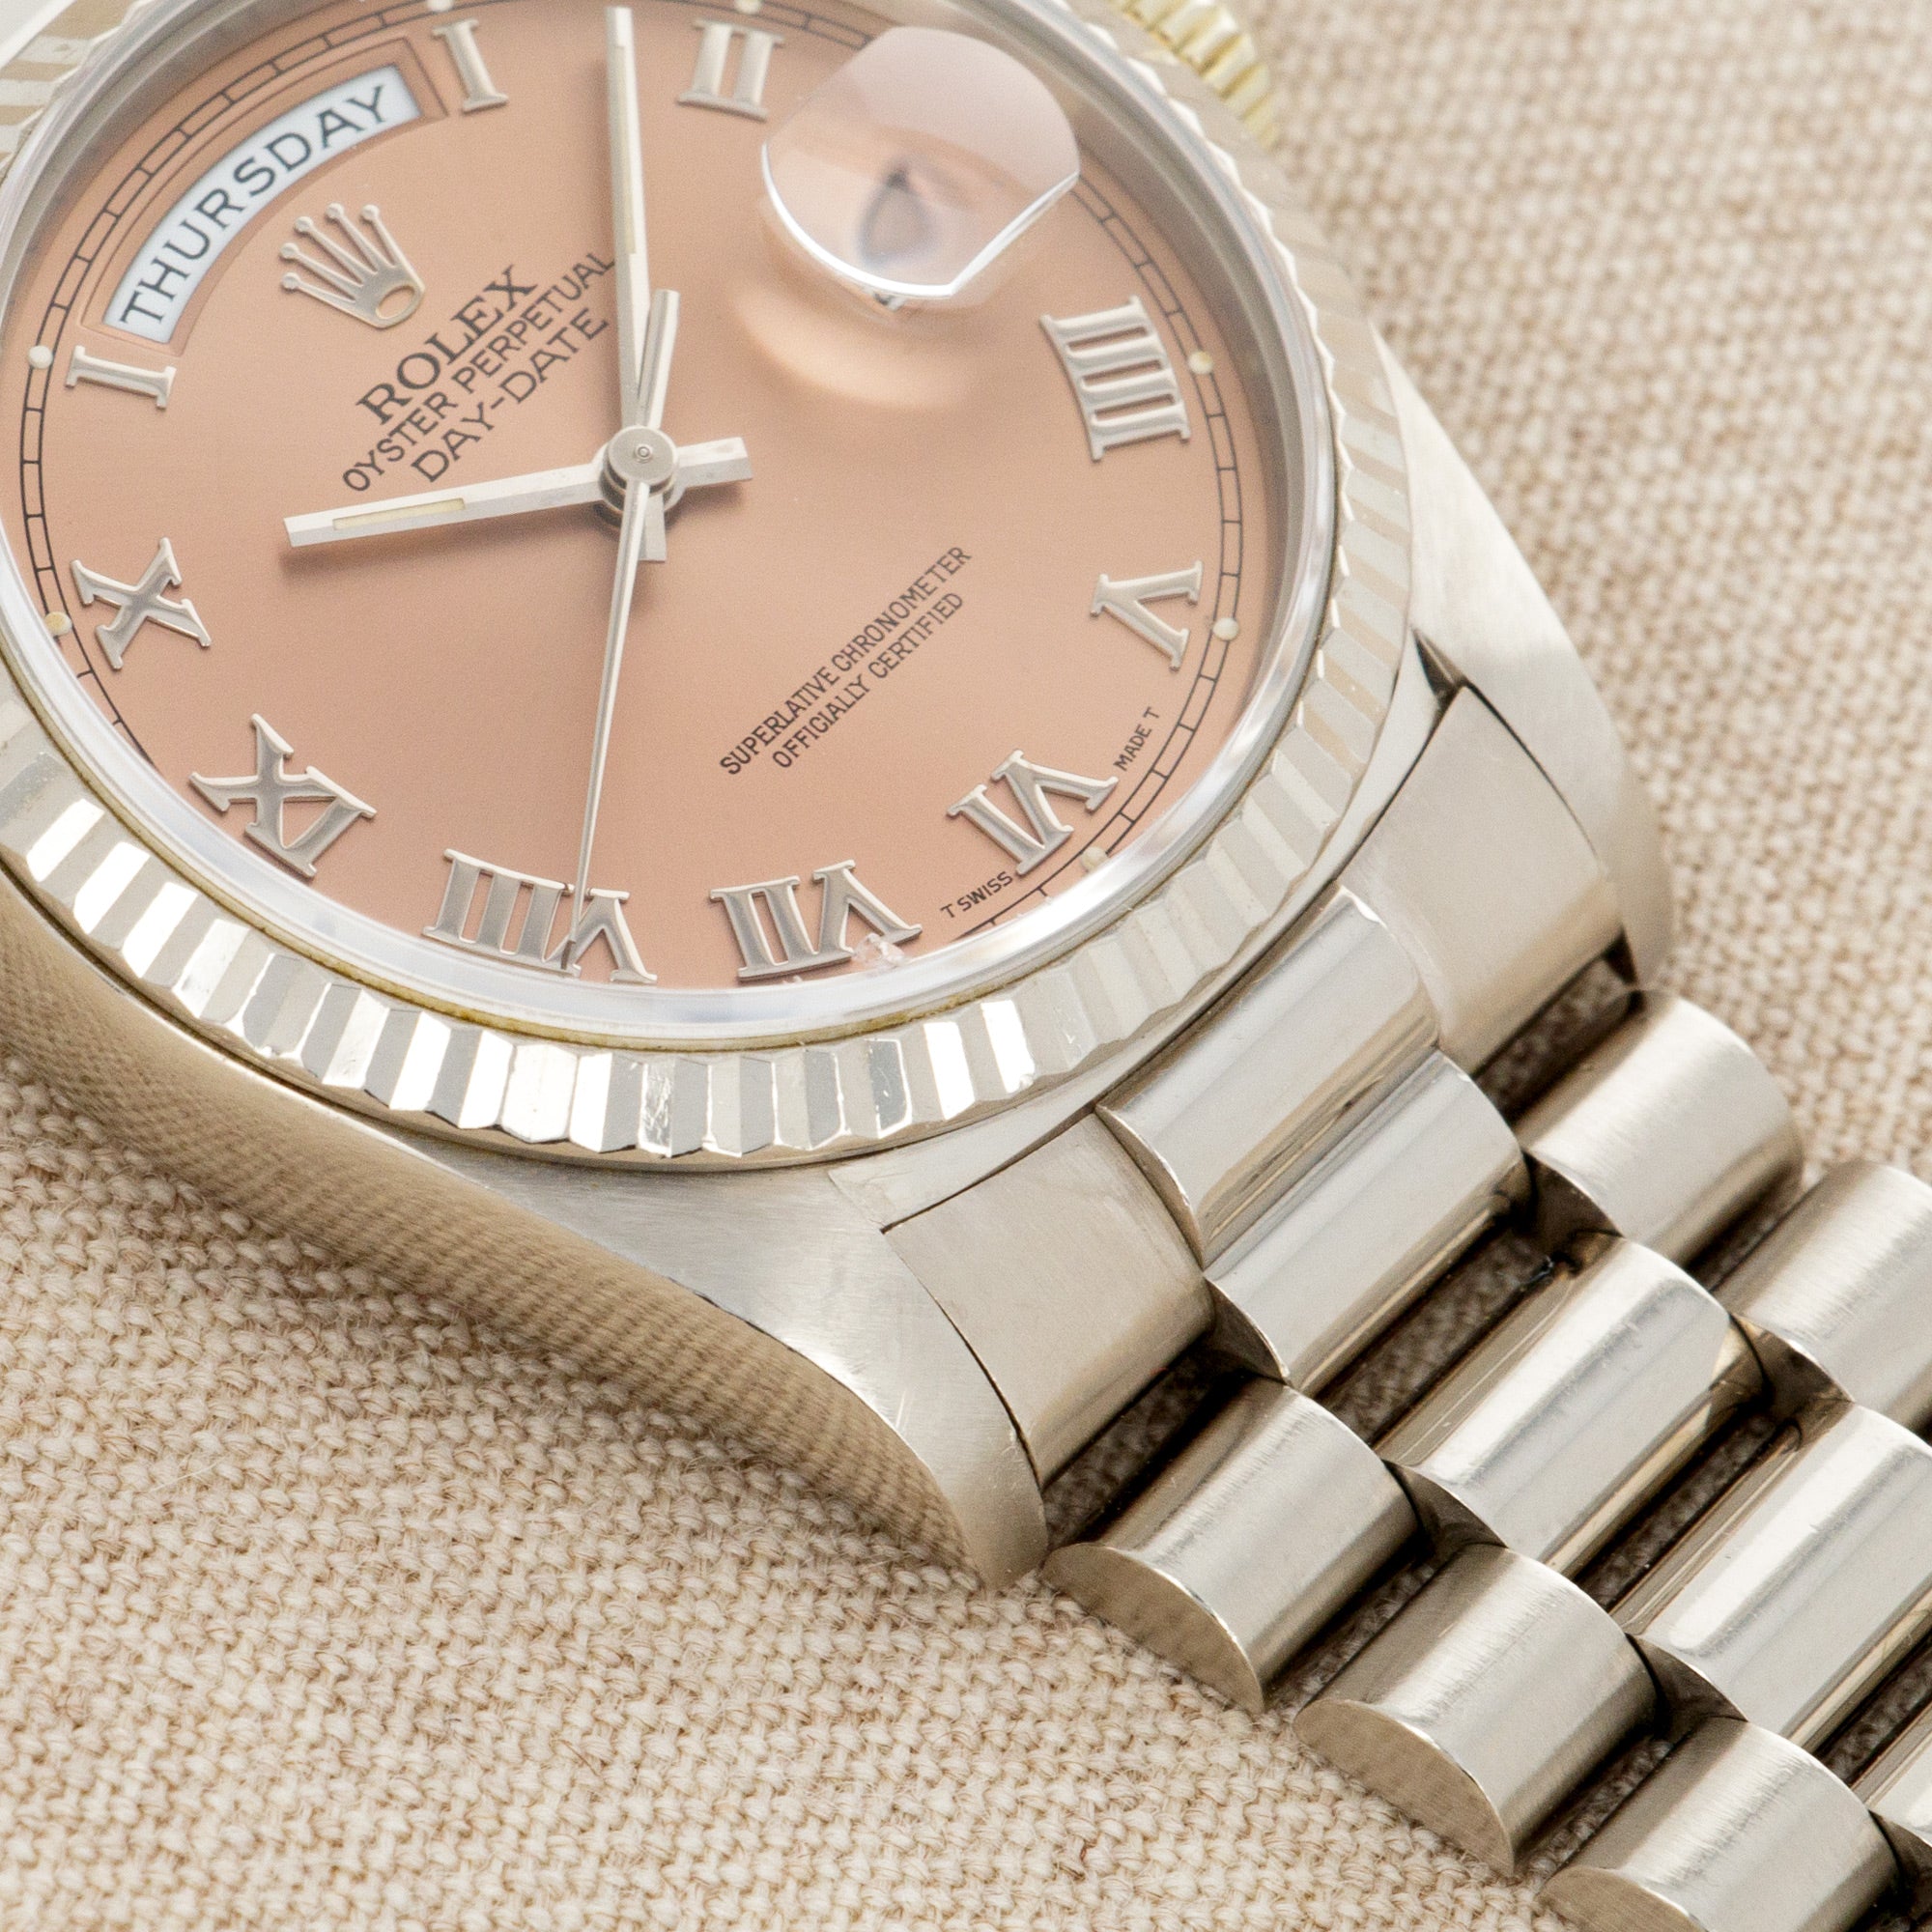 Rolex - Rolex White Gold Day-Date Ref. 18239 with Salmon Dial - The Keystone Watches